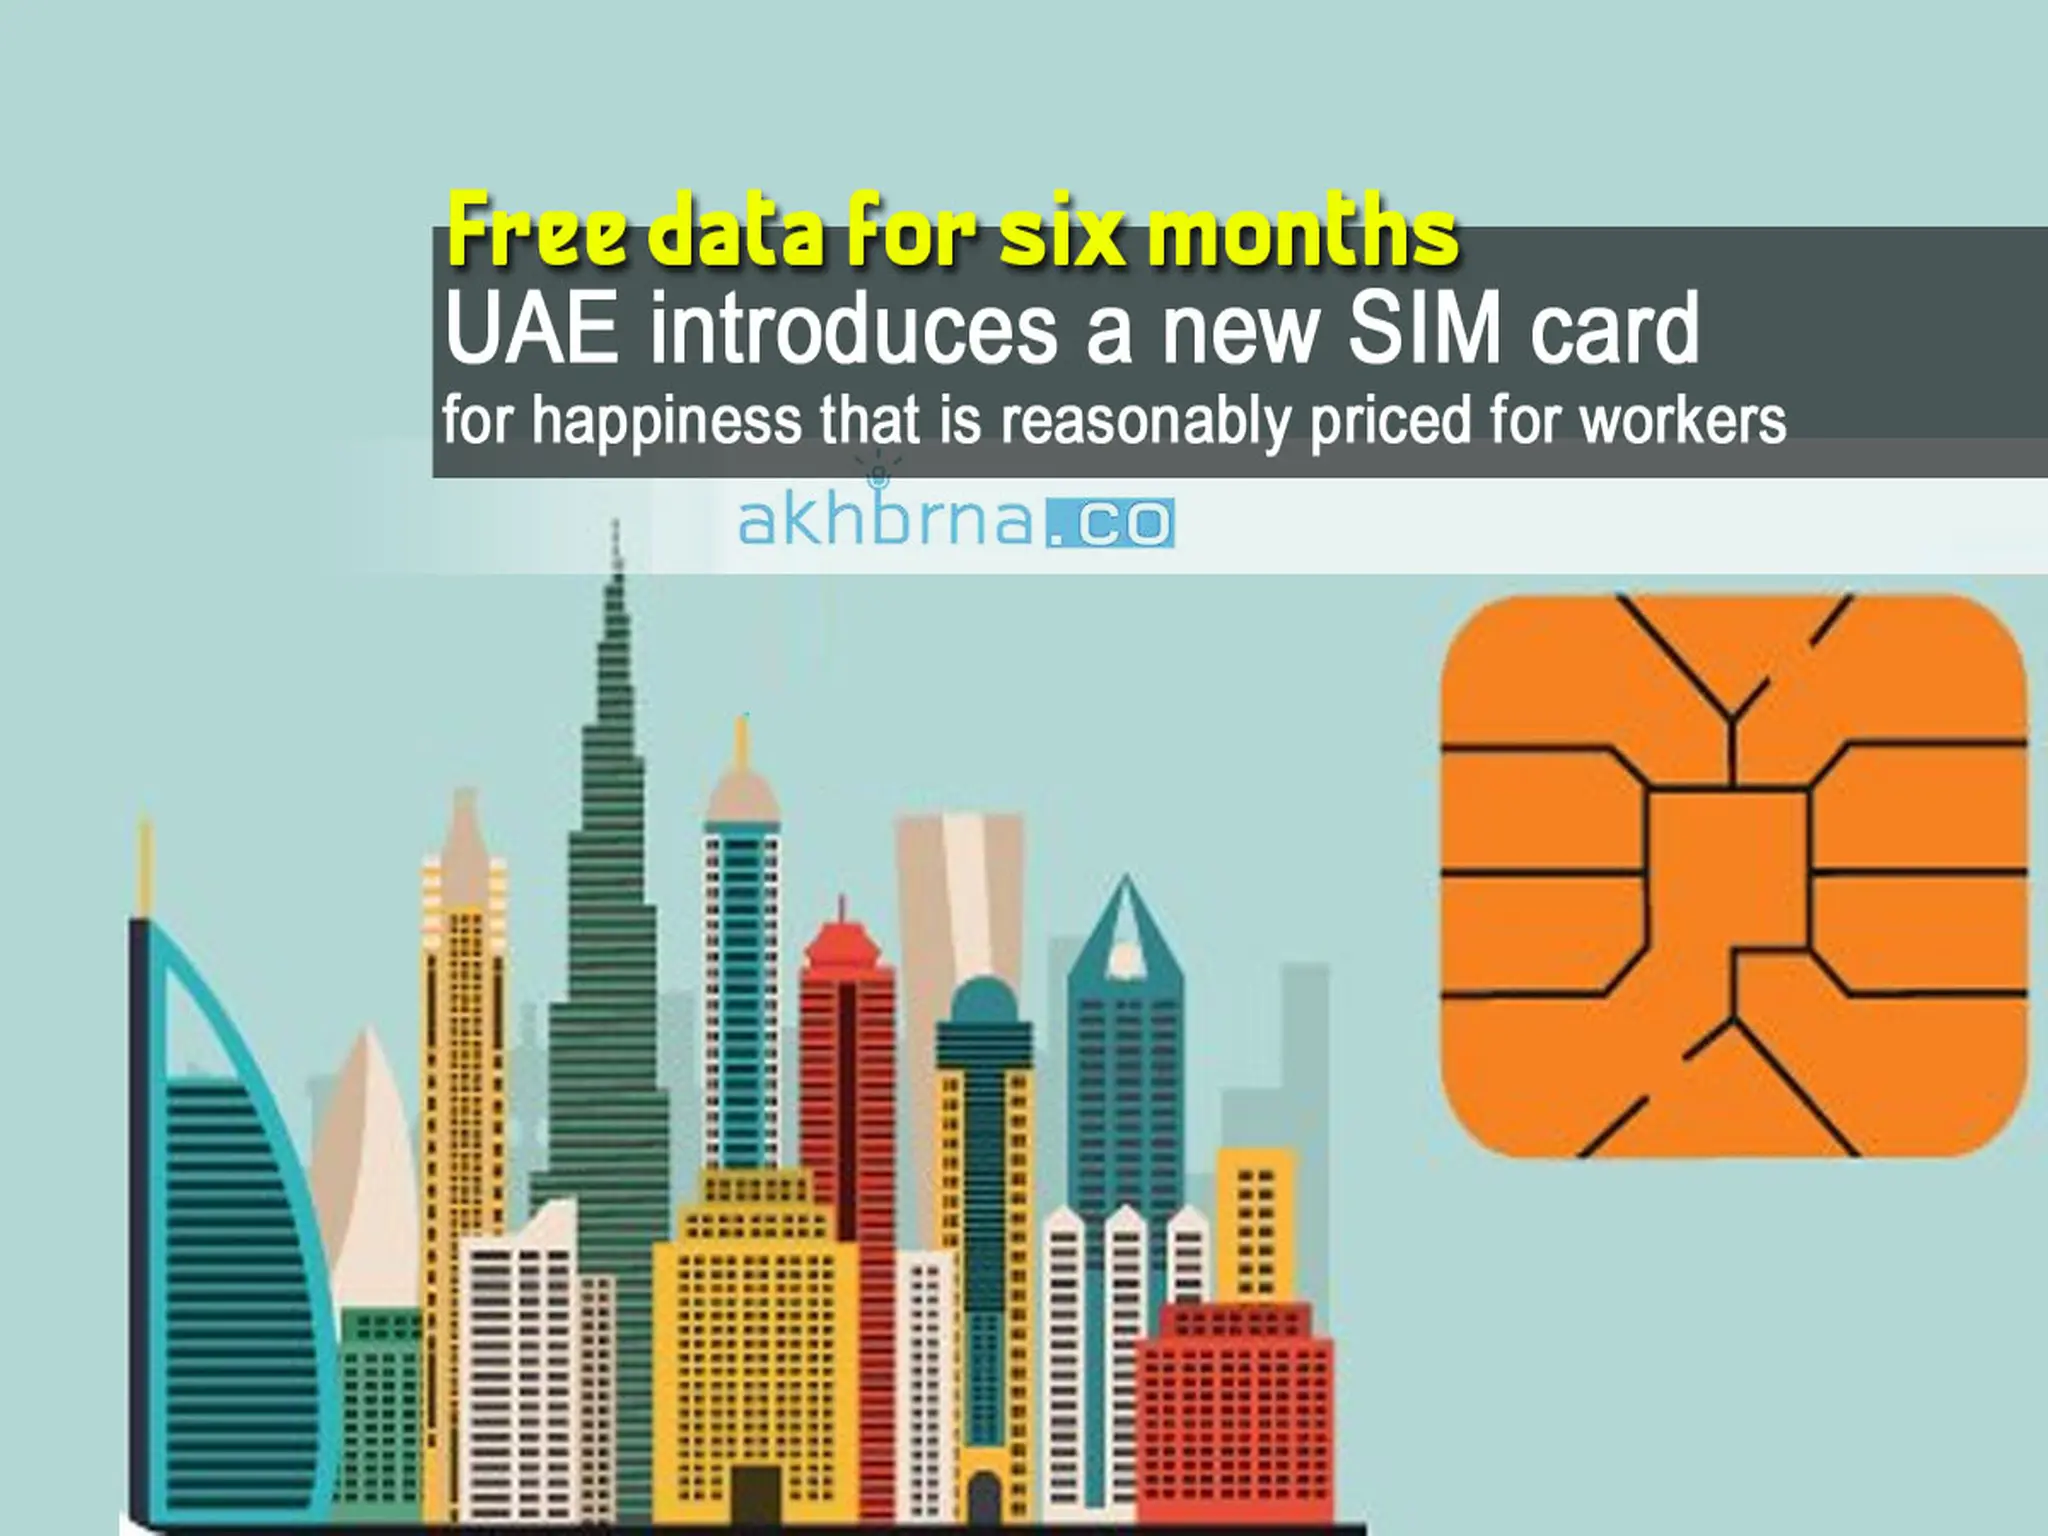 Free data for six months: UAE introduces a new SIM card for happiness that is reasonably priced for workers